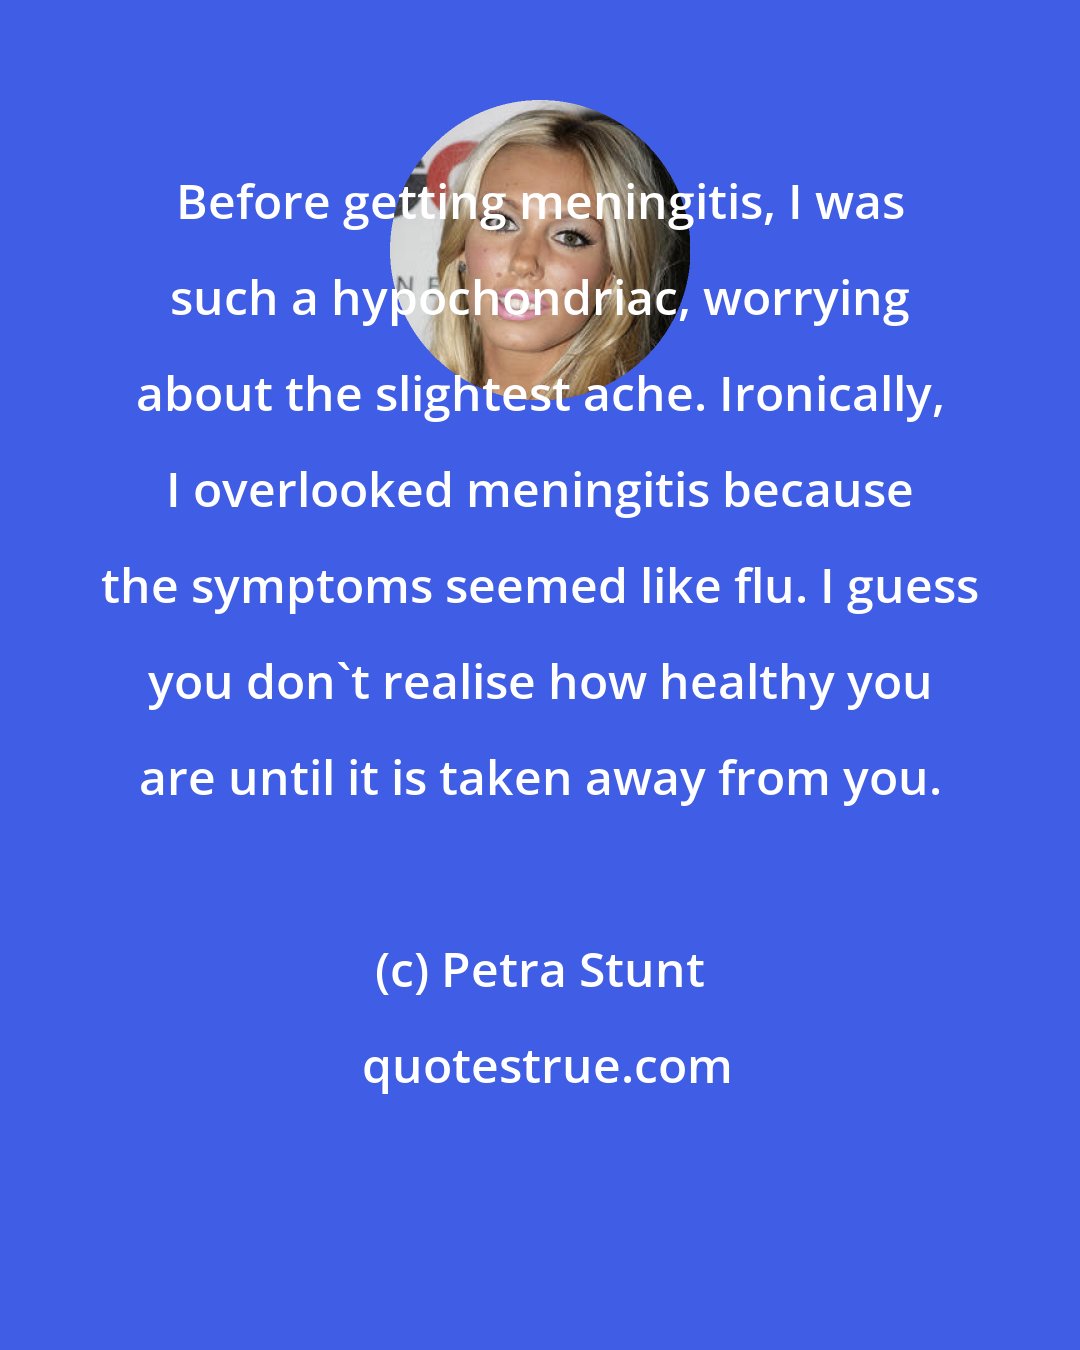 Petra Stunt: Before getting meningitis, I was such a hypochondriac, worrying about the slightest ache. Ironically, I overlooked meningitis because the symptoms seemed like flu. I guess you don't realise how healthy you are until it is taken away from you.